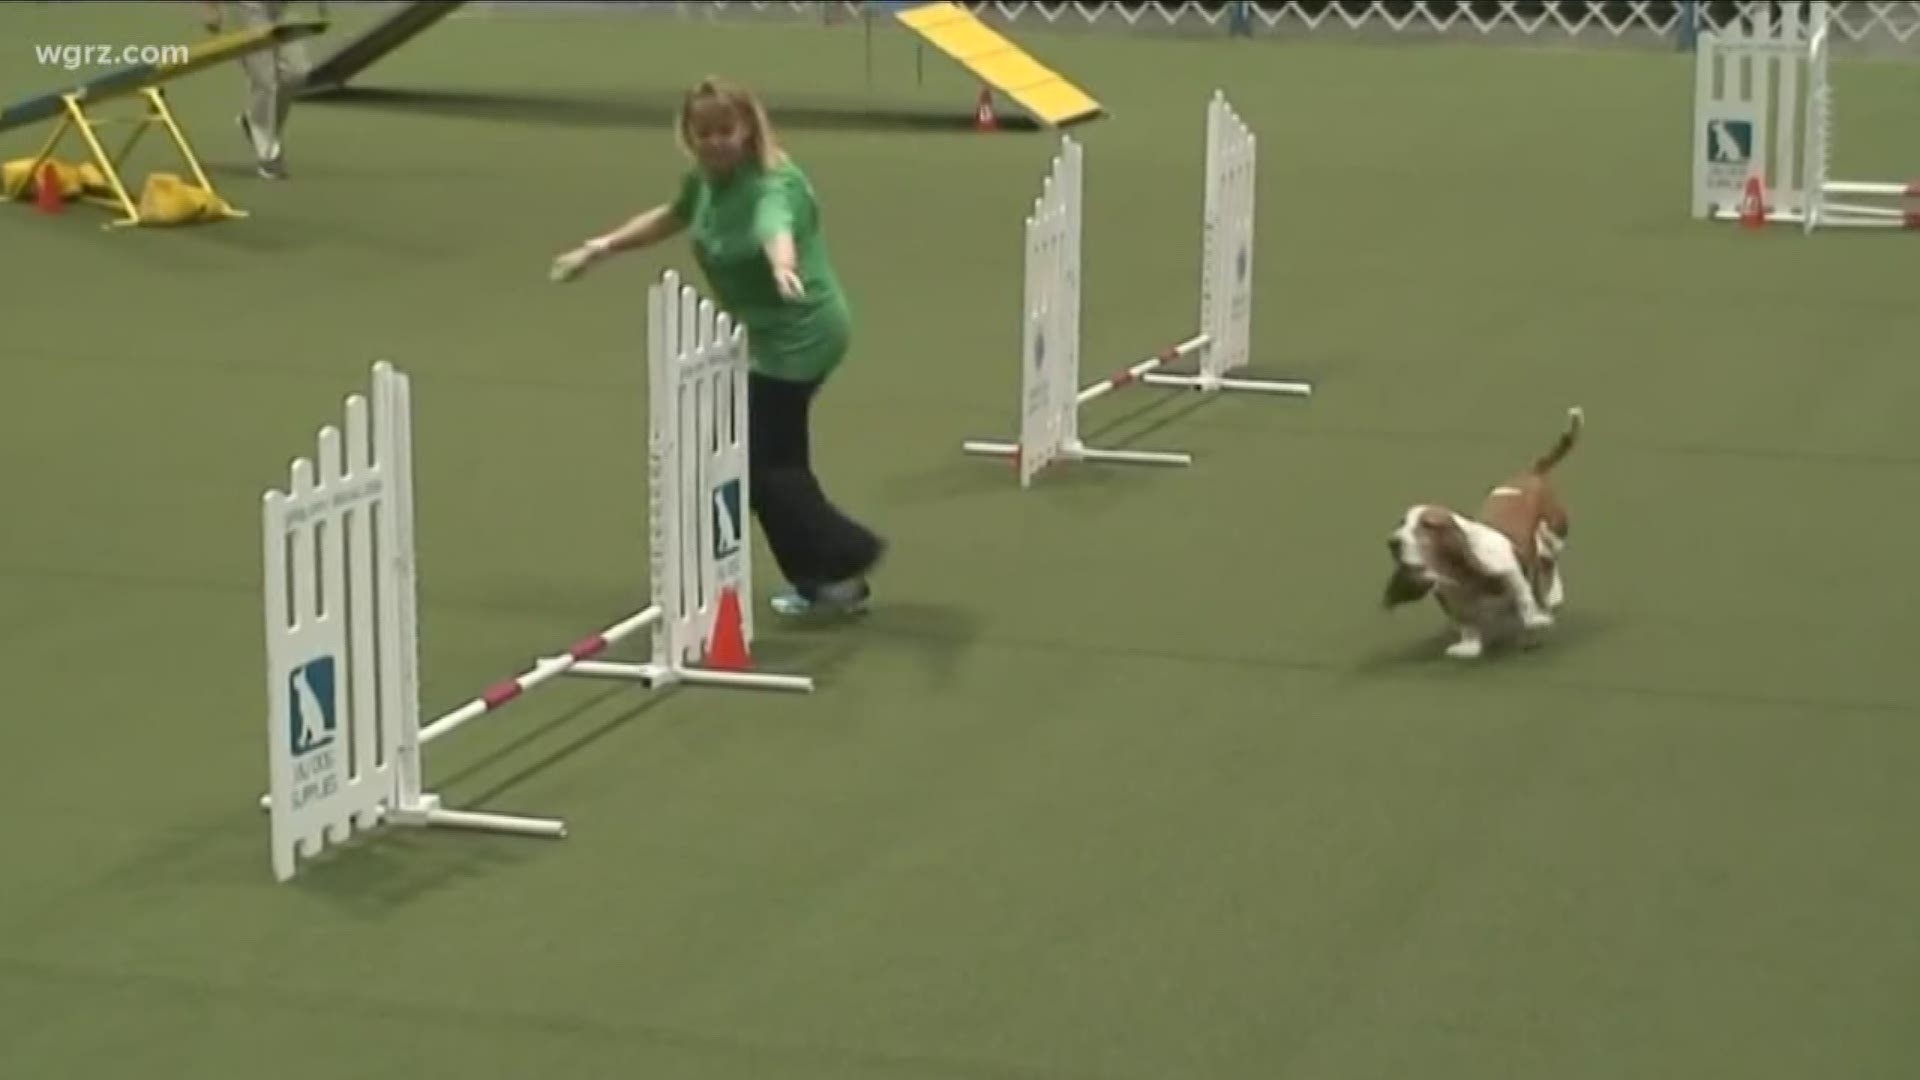 Dog competition training center in Lancaster